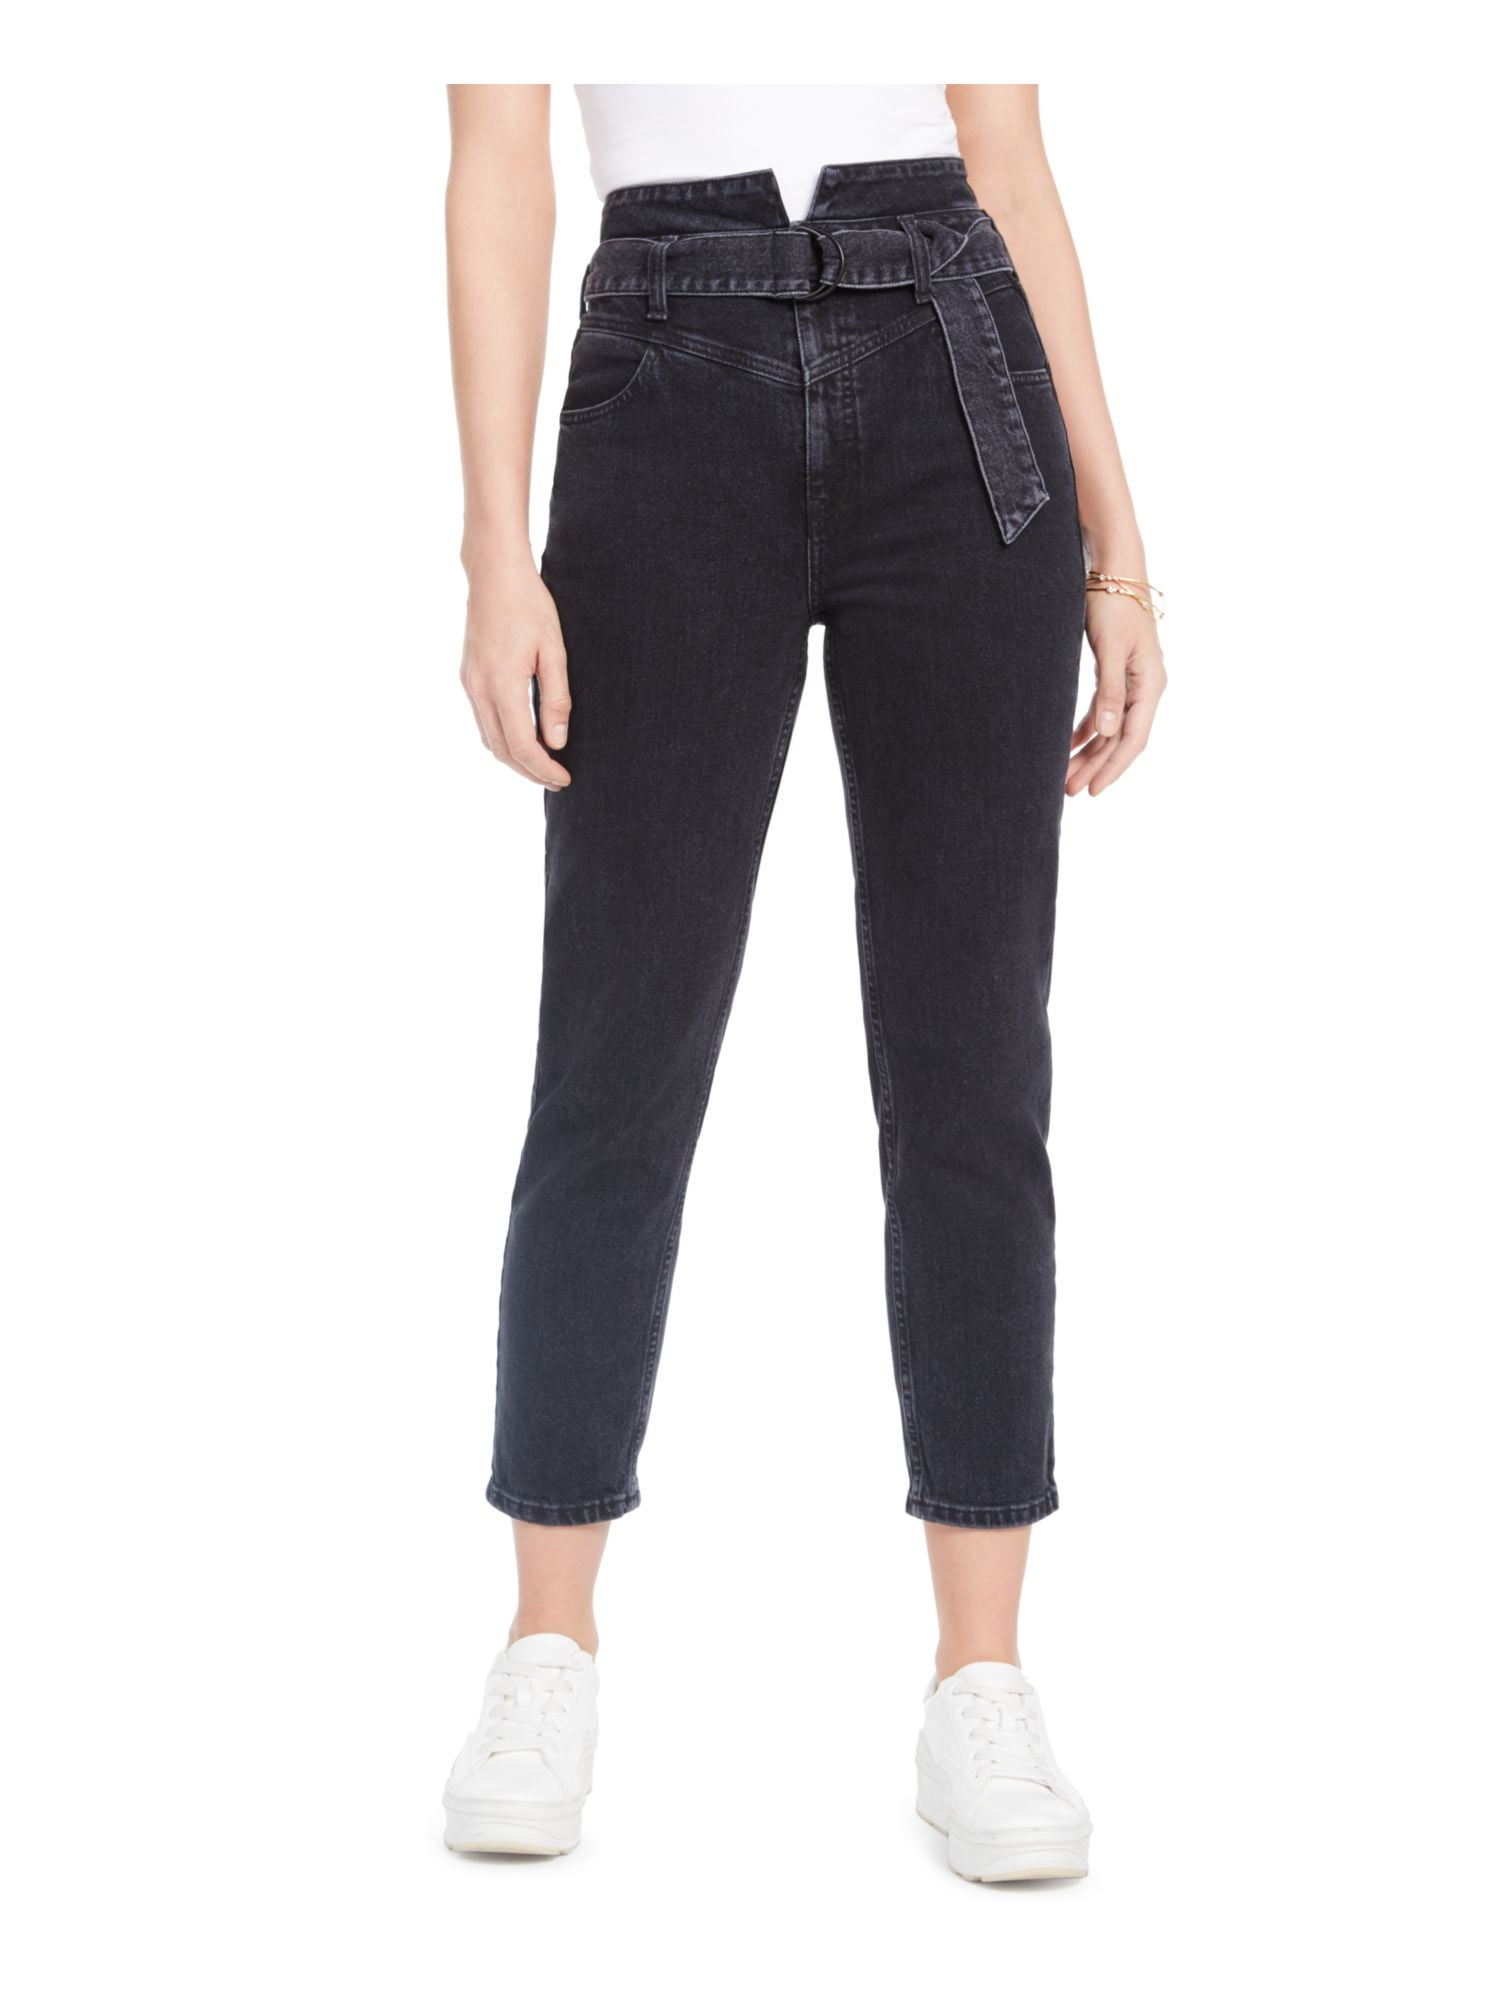 Guess Slim-Tapered Basic Dark Wash Jeans | Hamilton Place